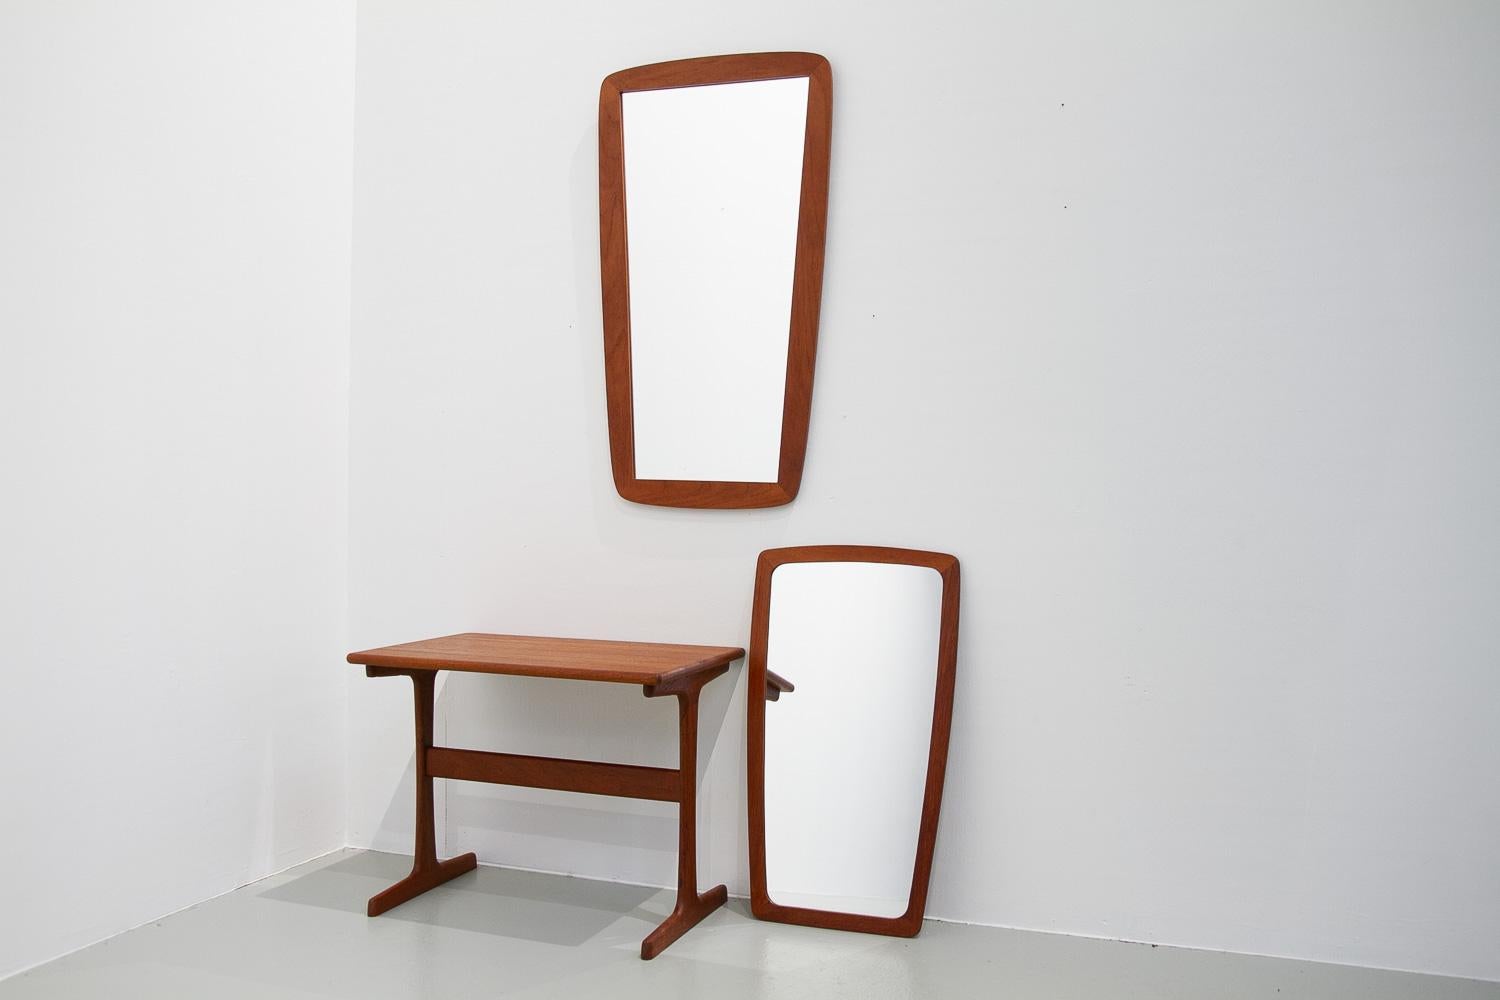 Danish Modern Teak Mirrors and Table, 1960s. Set of 3.
Set of two Scandinavian Mid-Century Modern wall mirrors with frames in solid teak and small console or side table made in Denmark in the 1960s.
Table, height: 42 cm.
Small mirror, height: 60